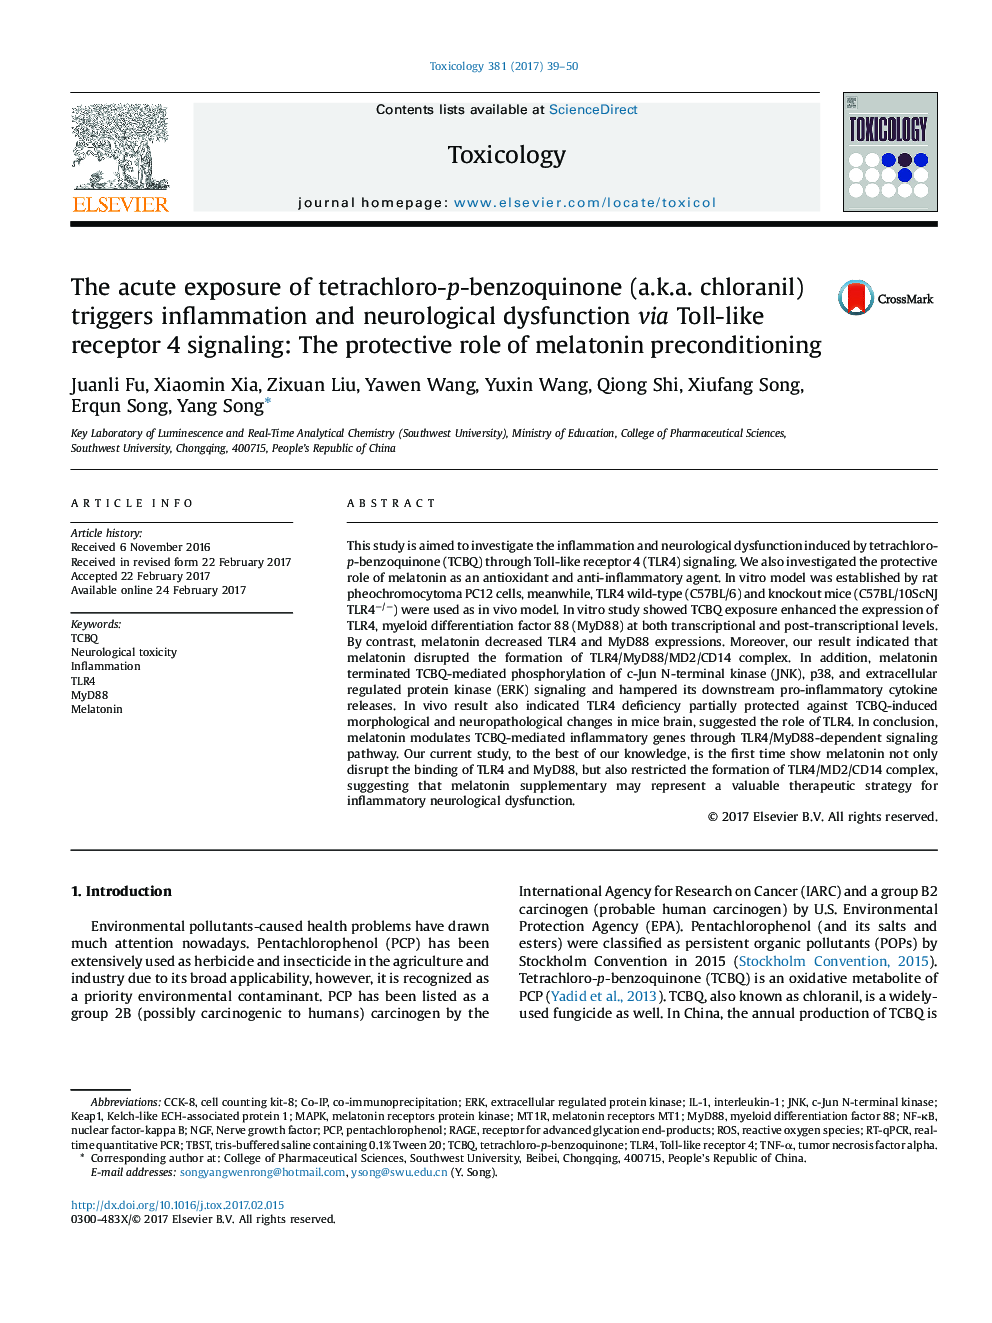 The acute exposure of tetrachloro-p-benzoquinone (a.k.a. chloranil) triggers inflammation and neurological dysfunction via Toll-like receptor 4 signaling: The protective role of melatonin preconditioning